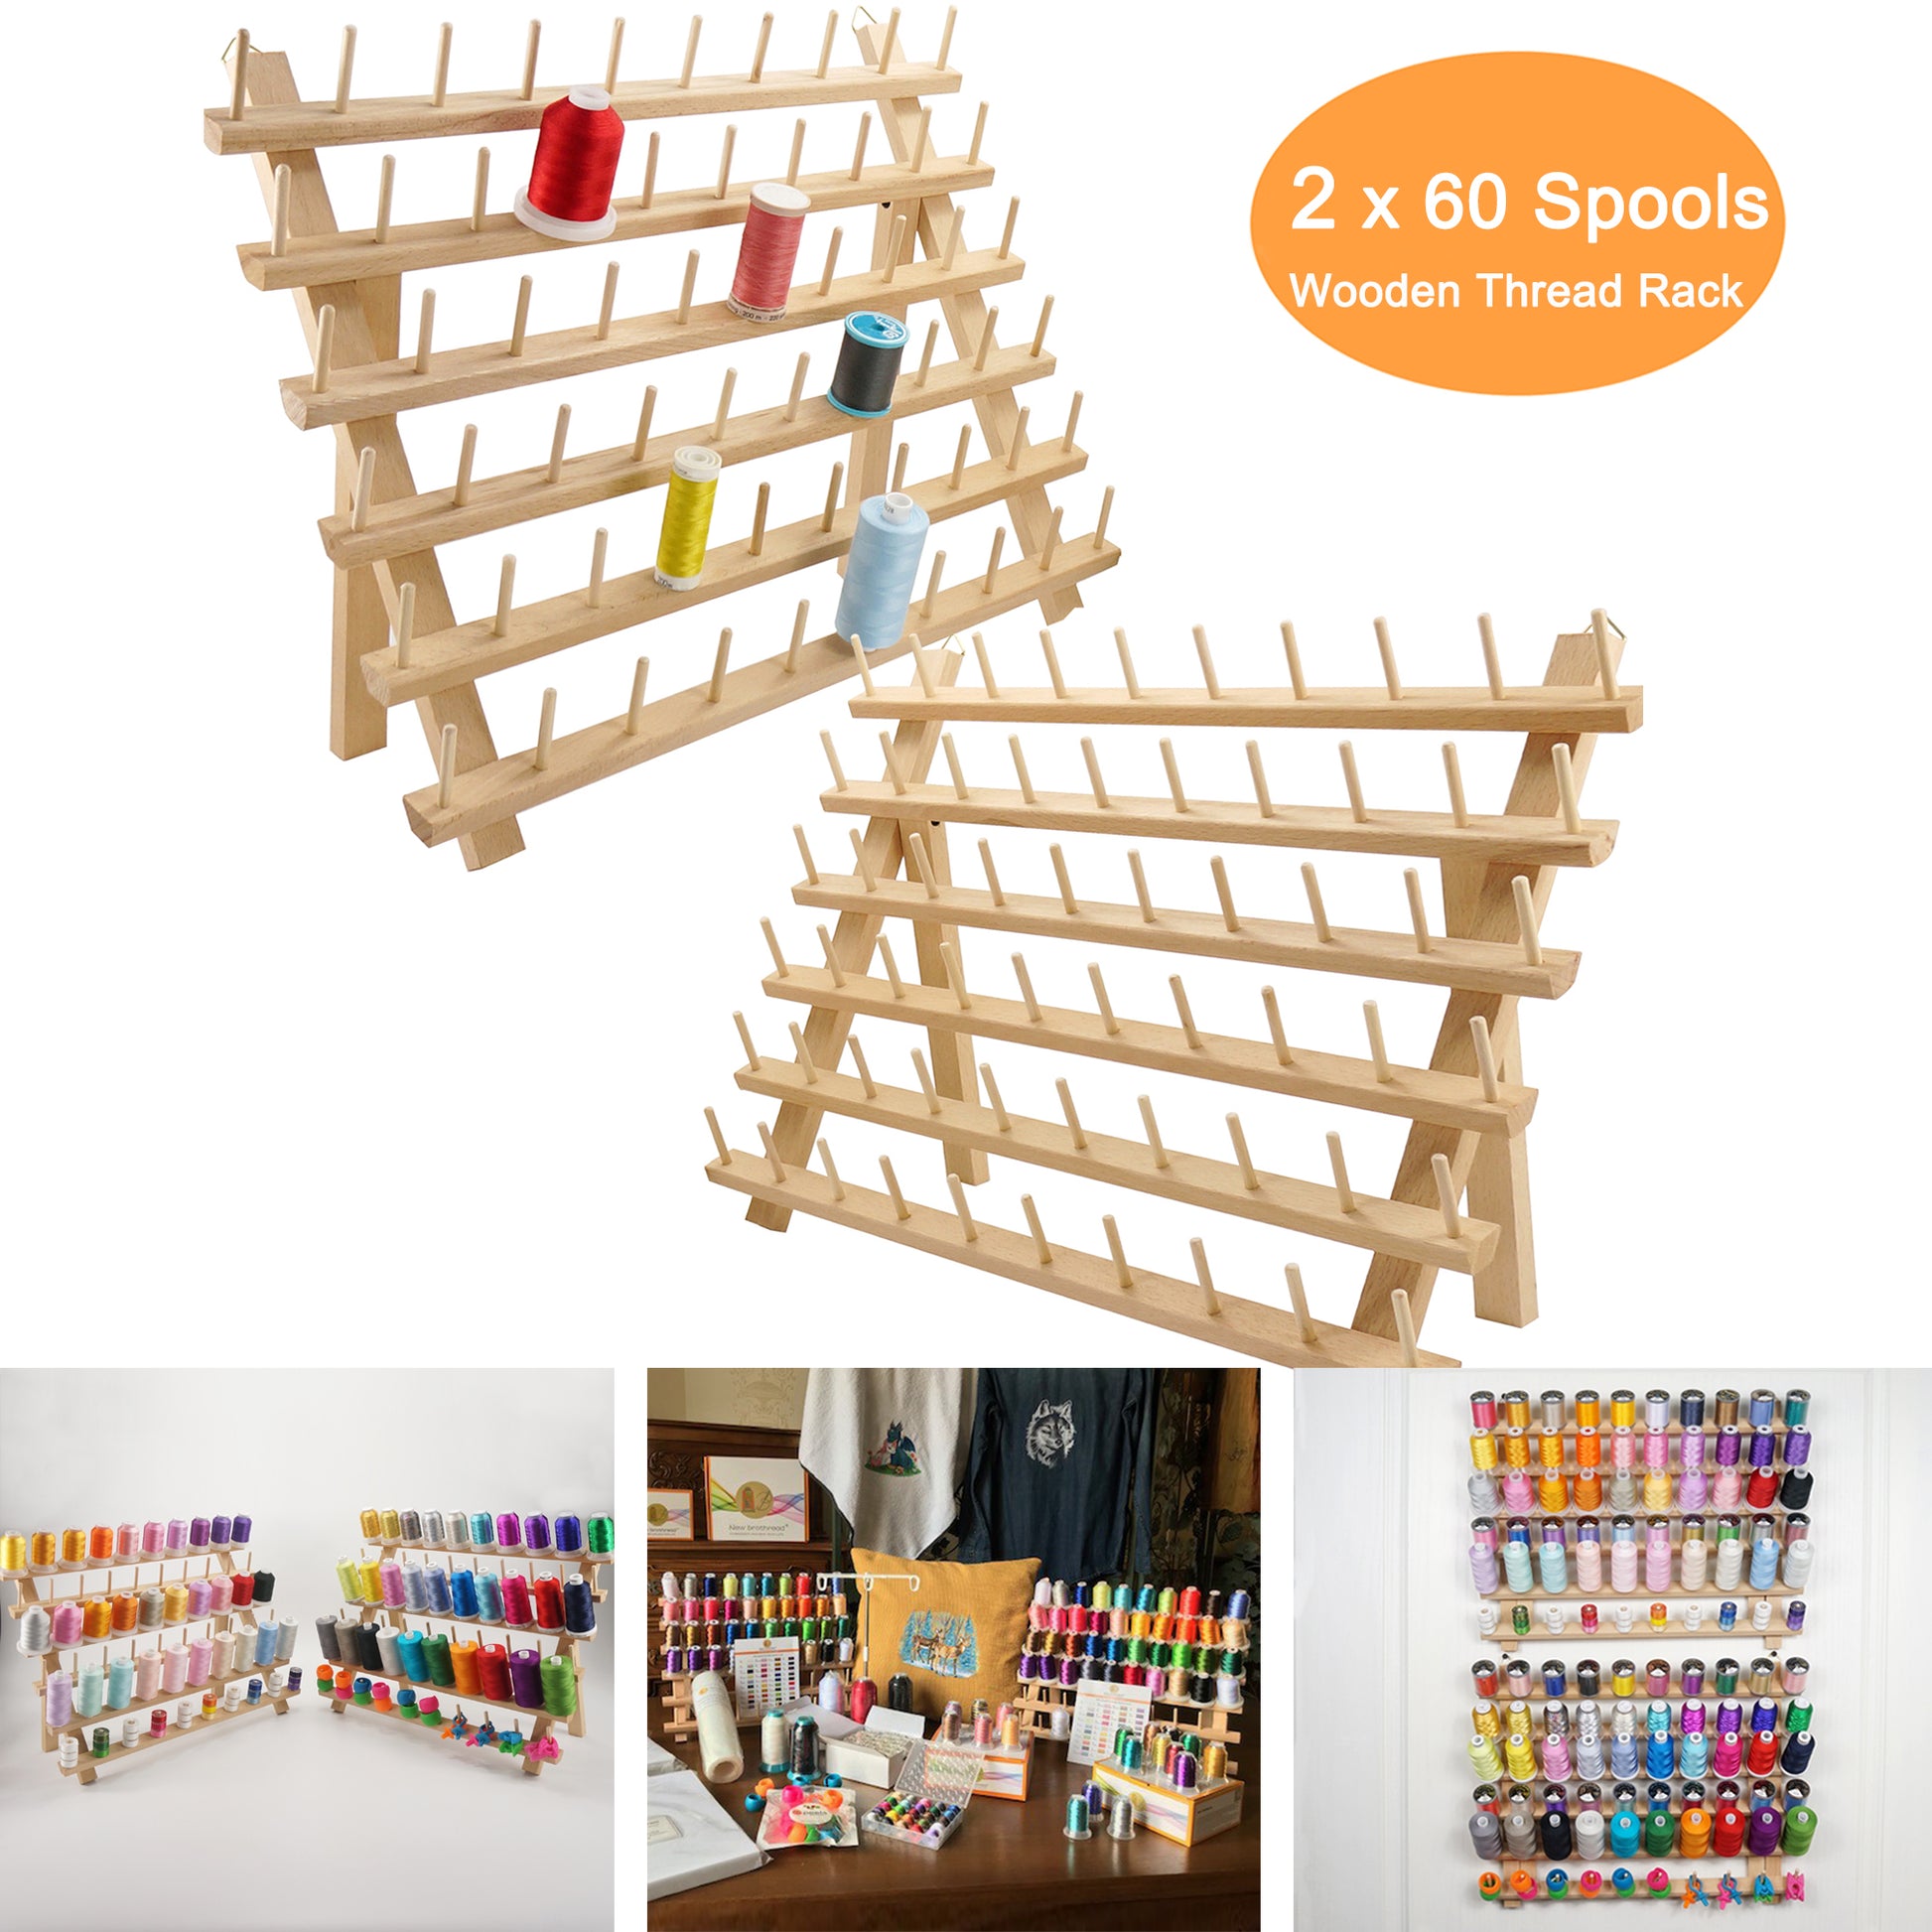 Thread Storage Spindles - safely store and transport your sewing